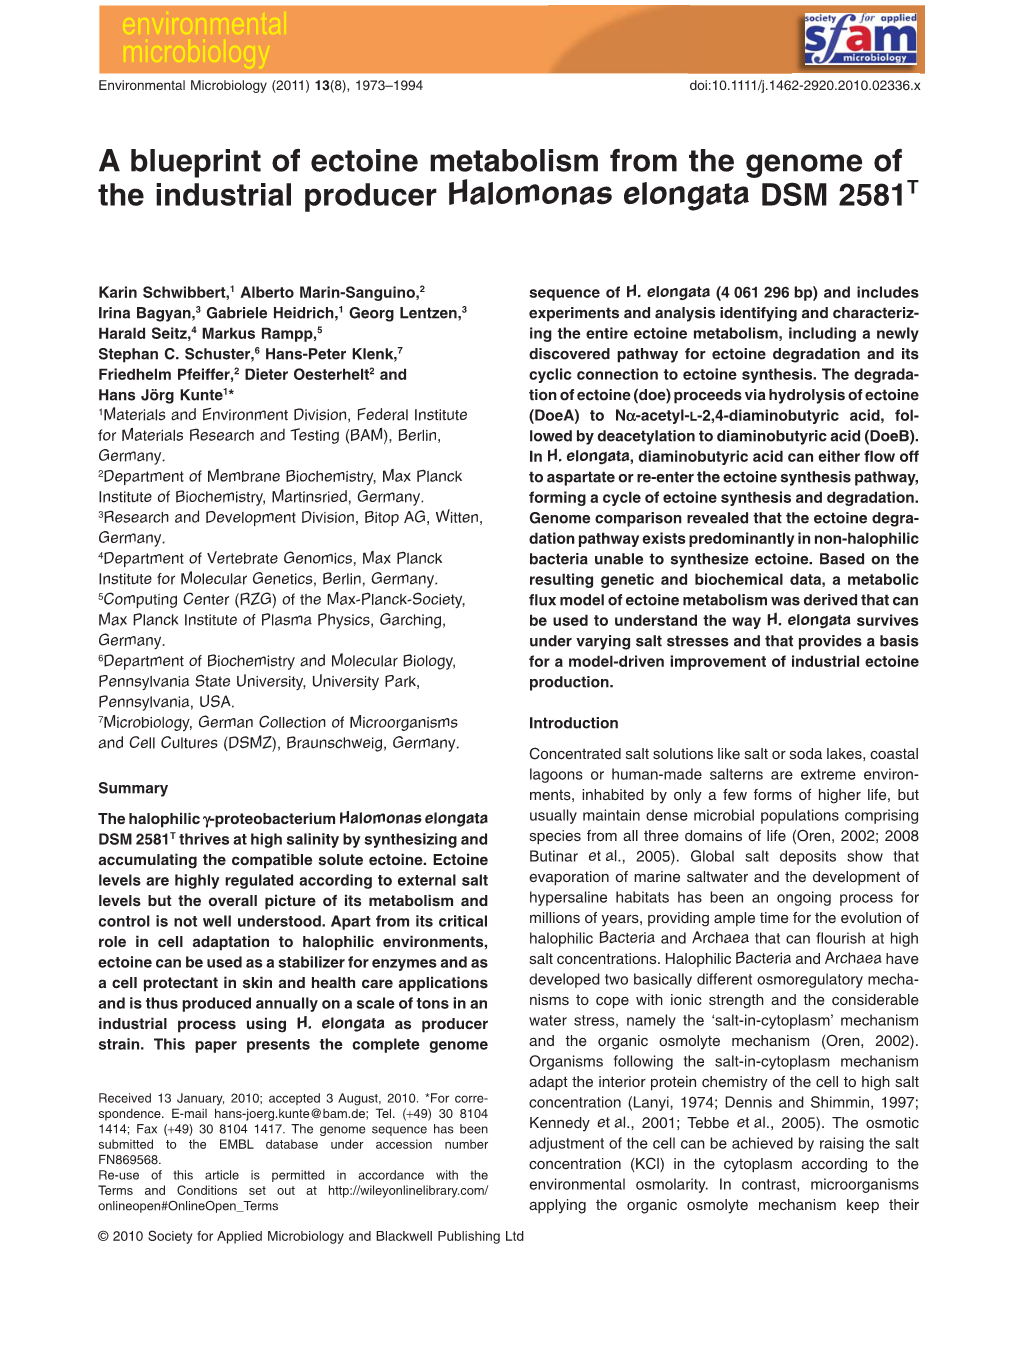 A Blueprint of Ectoine Metabolism from the Genome of the Industrial Producer Halomonas Elongata DSM 2581T